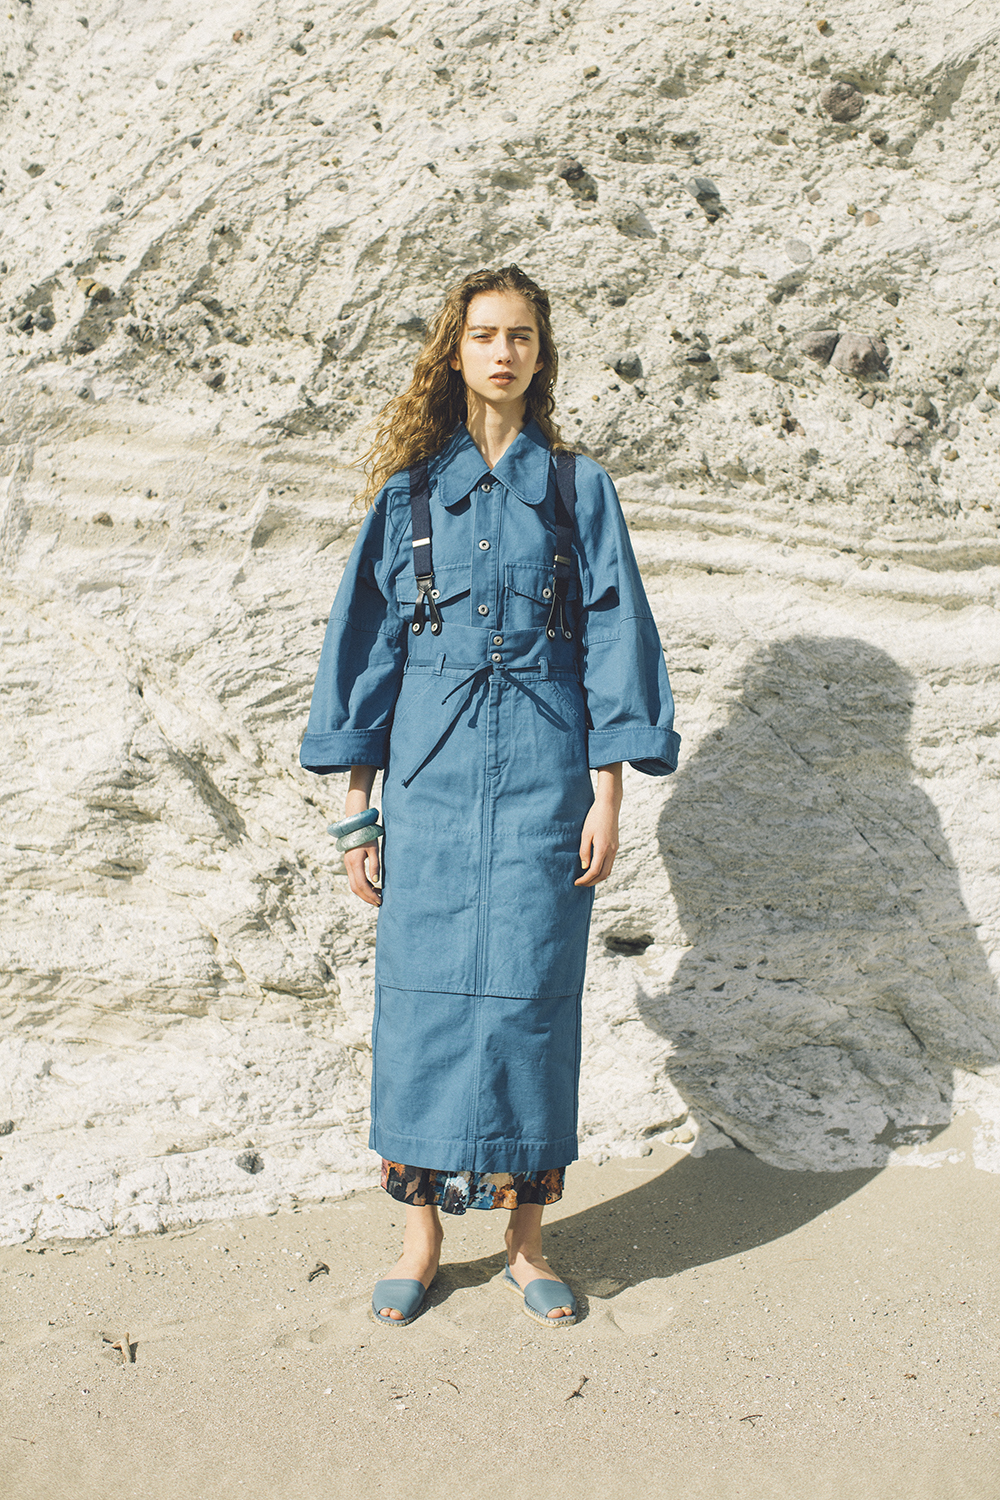 【WOMEN’S 2019 SS】- Glaring Color – LOOK アイテム